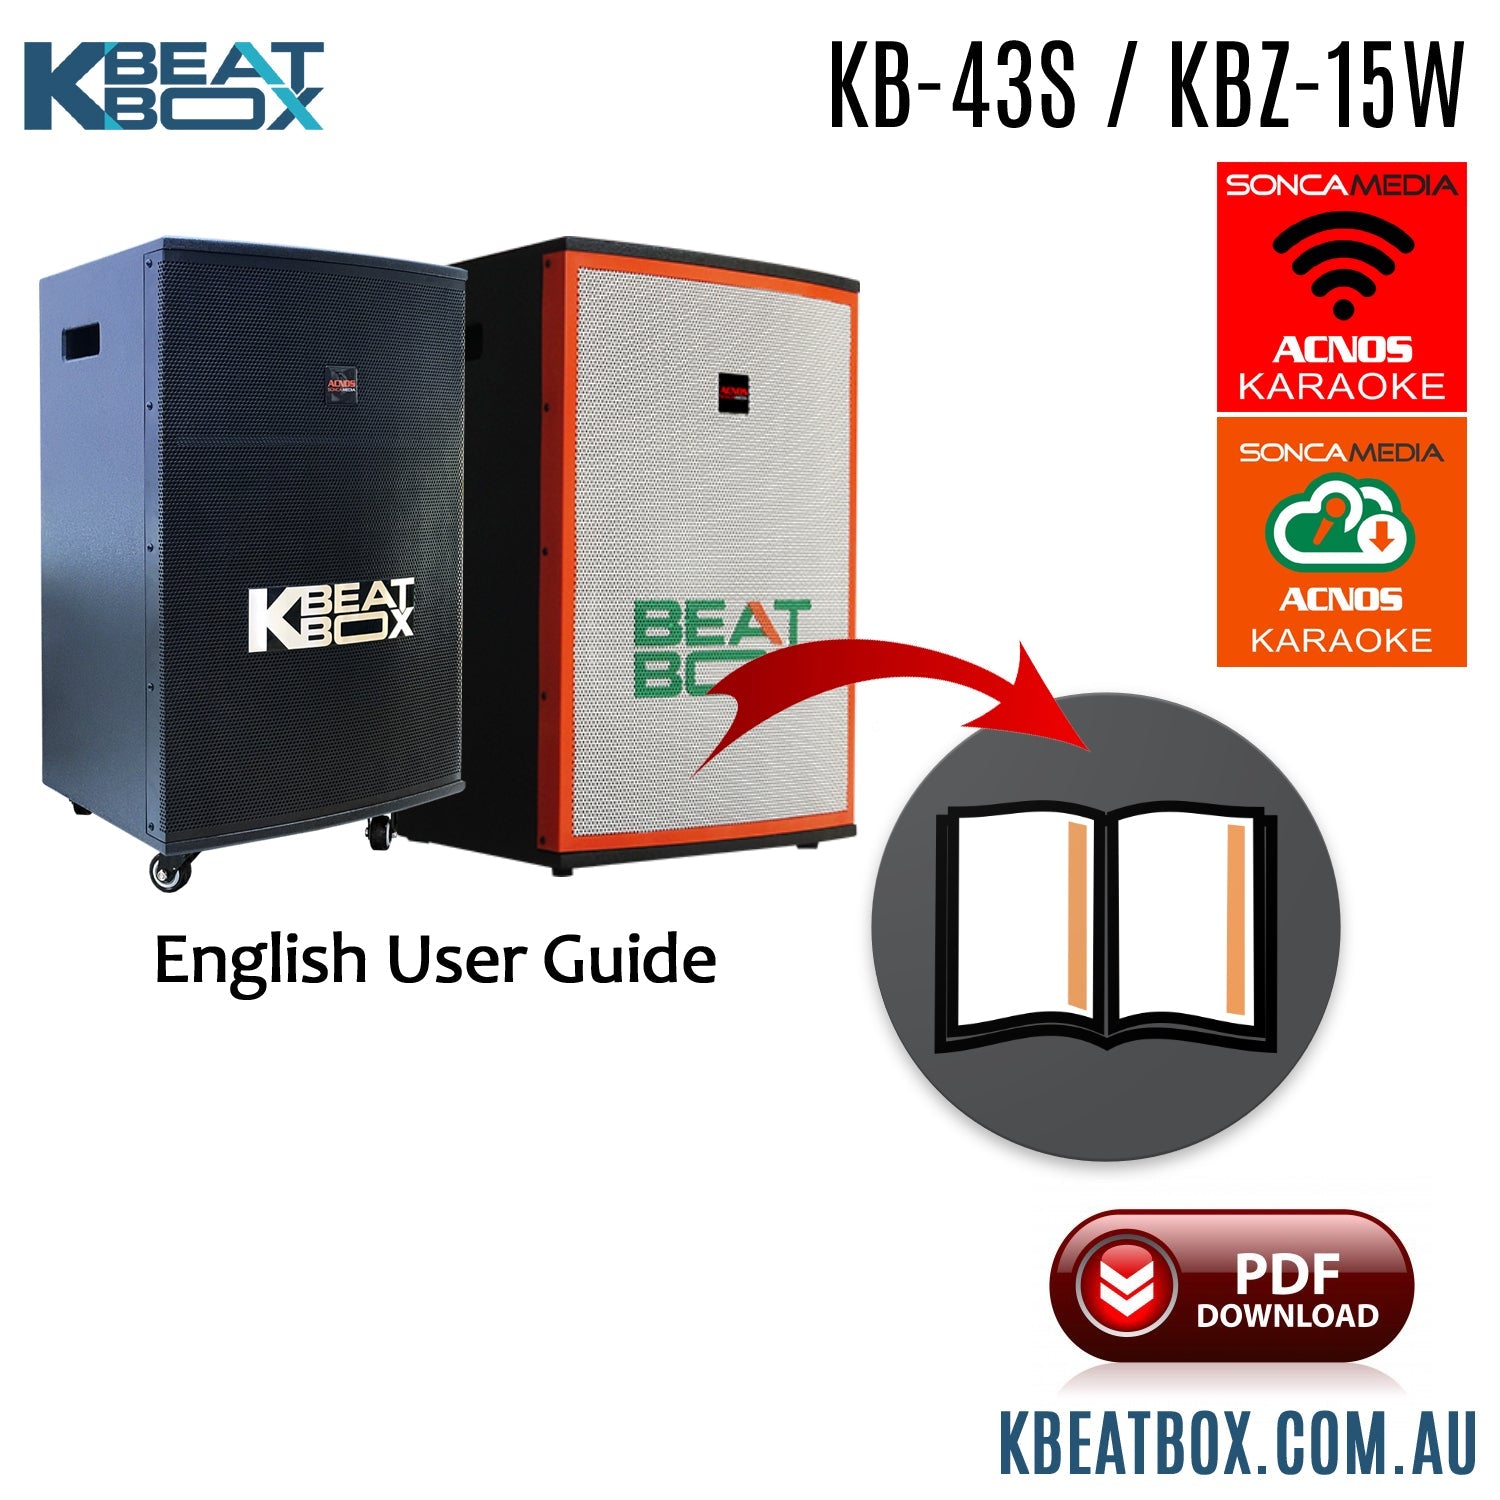 How To Connect Guide - KBeatBox KB-43S & KBZ-15W - Karaoke Home Entertainment